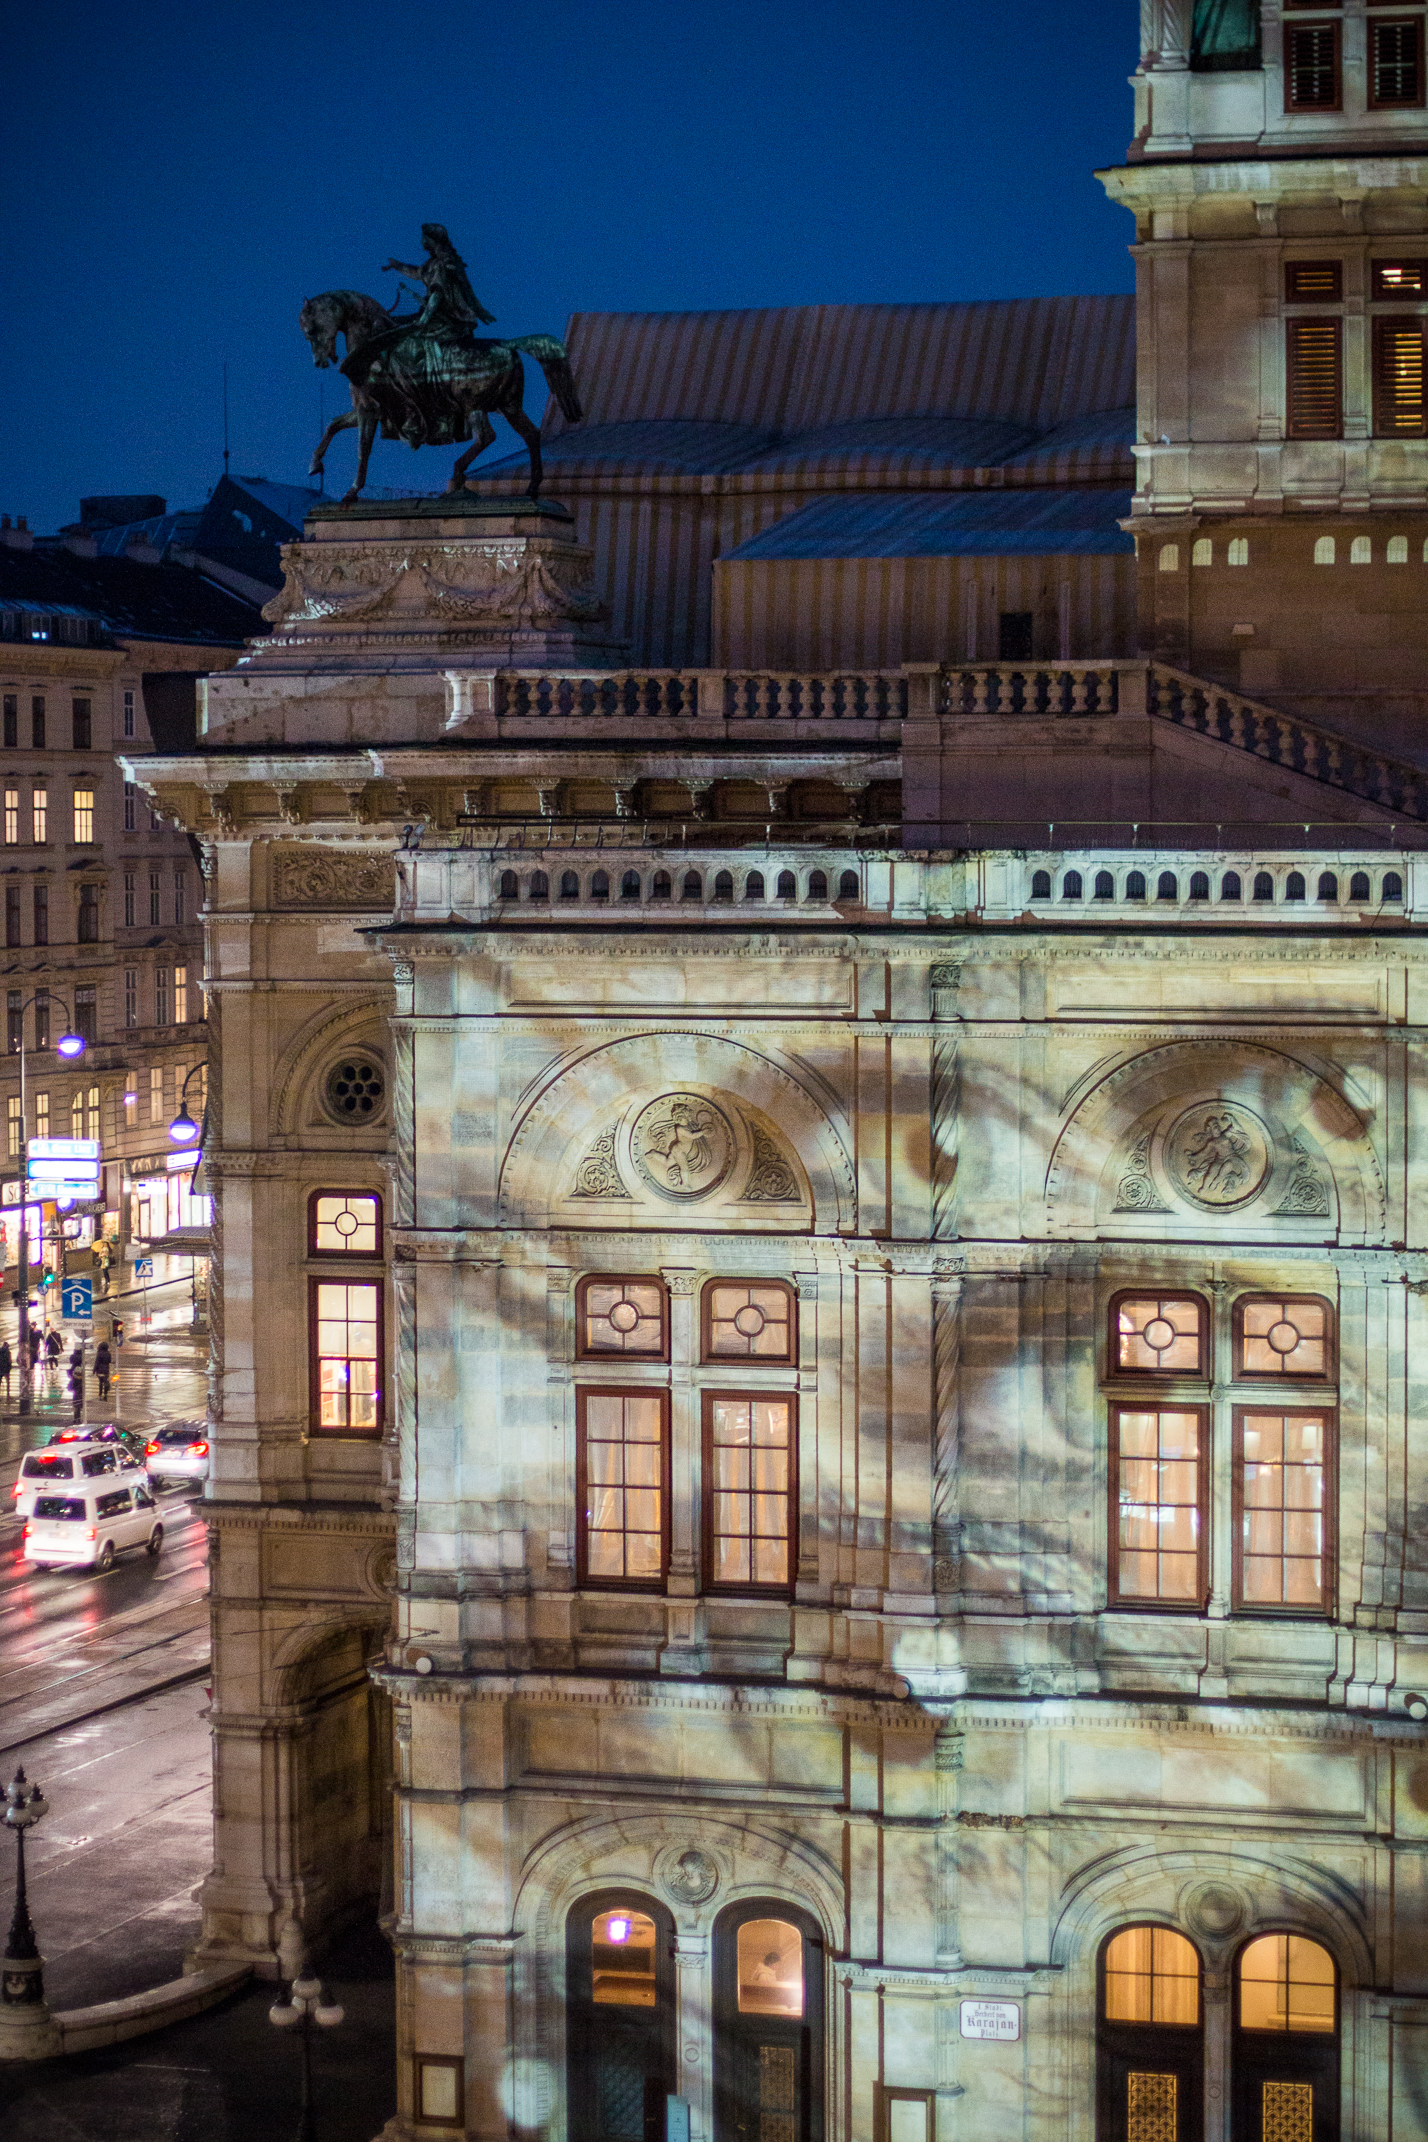 Out & About: SWISS #attentivenow Vienna | Love Daily Dose